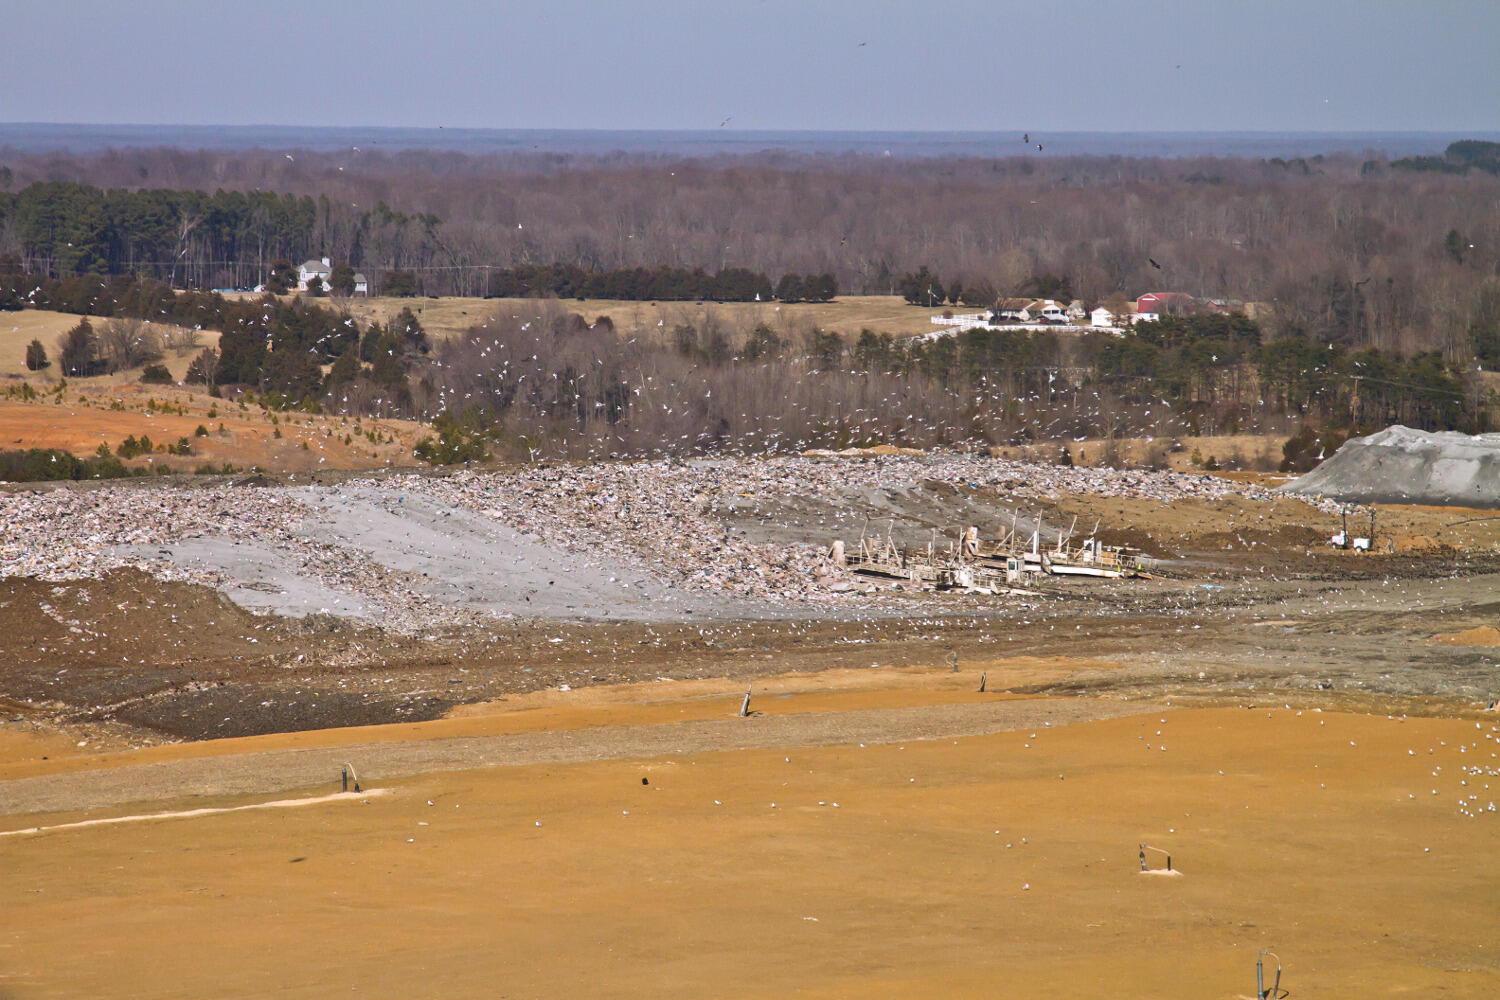 Eagles, gulls and other scavenger birds flock to a Chesapeake Bay-area landfill for mealtime.